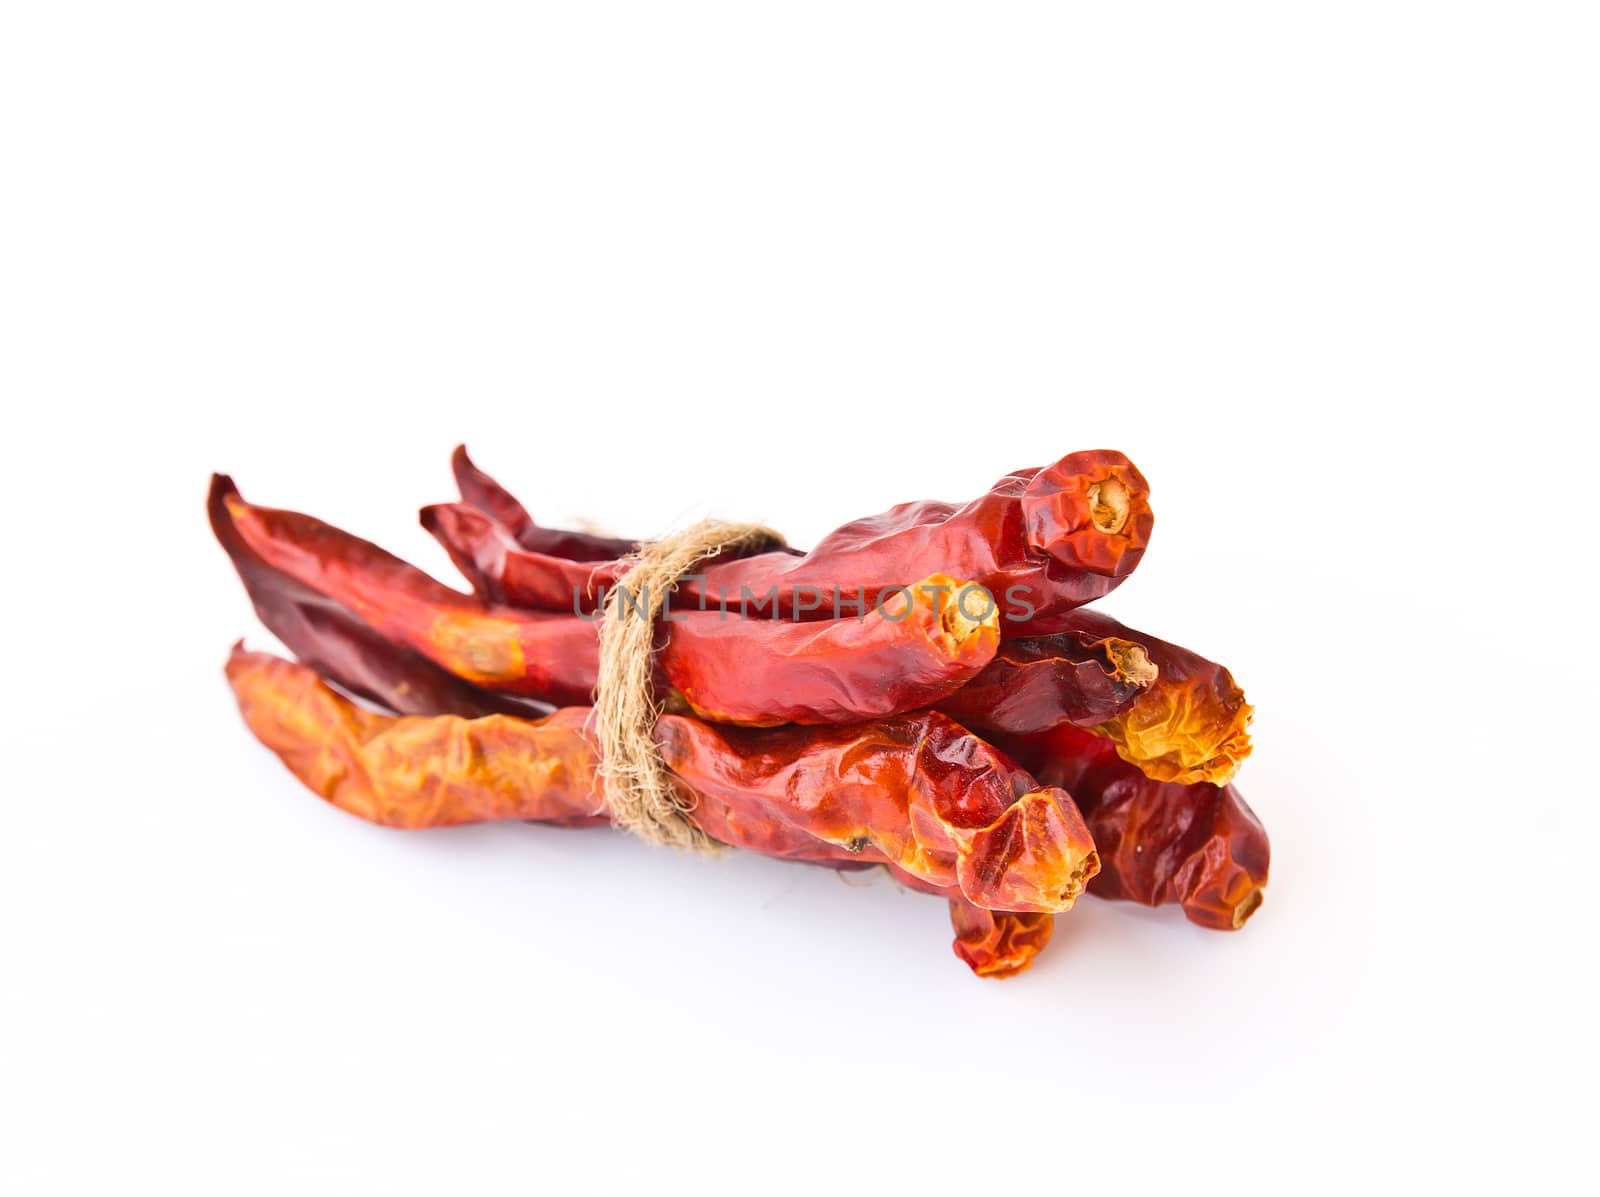 dried chili peppers by den_rutchapong